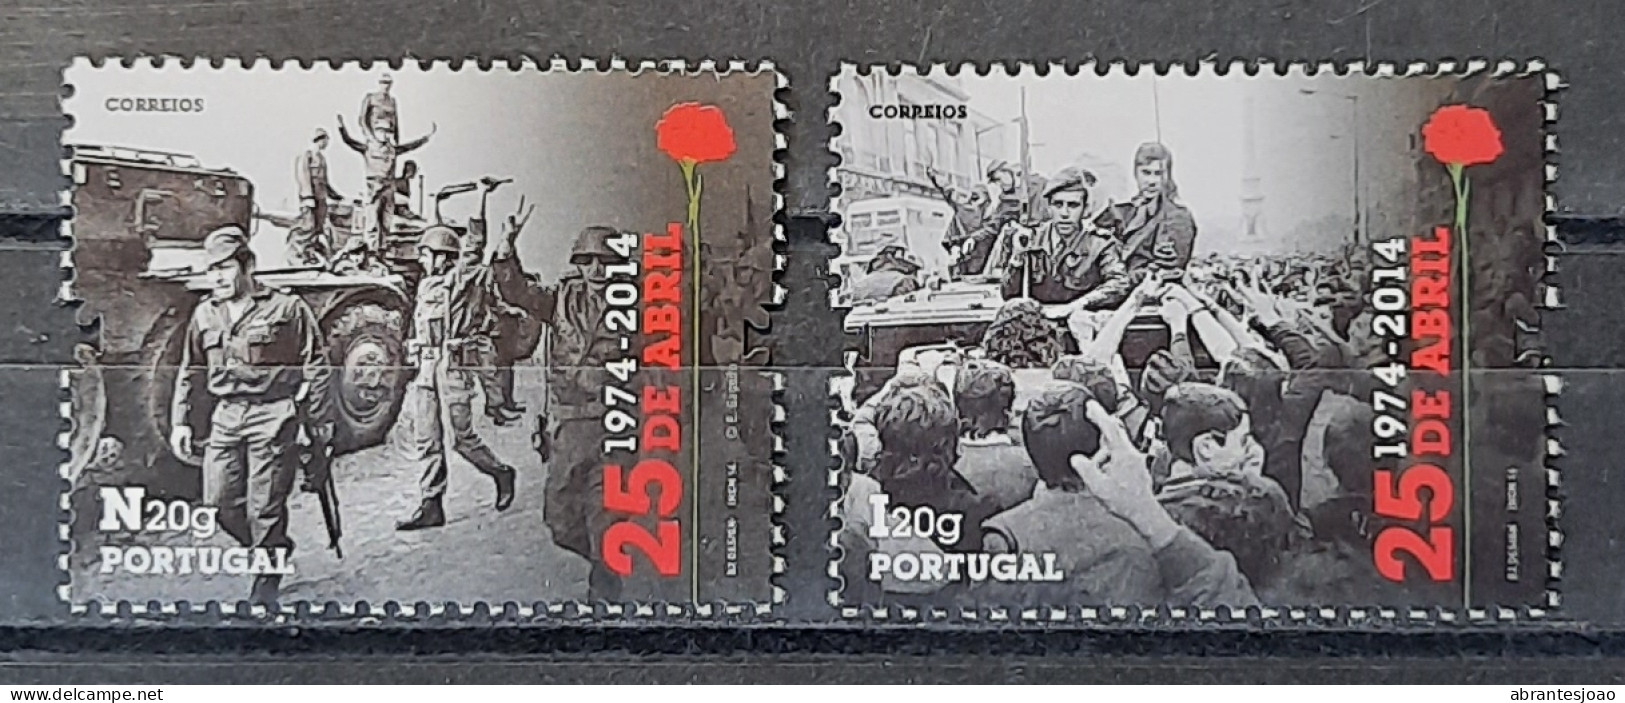 2014 - Portugal - 40 Years Of 25th April Revolution - MNH - 2 Stamps + Souvenir Sheet Of 1 Stamp - Nuovi